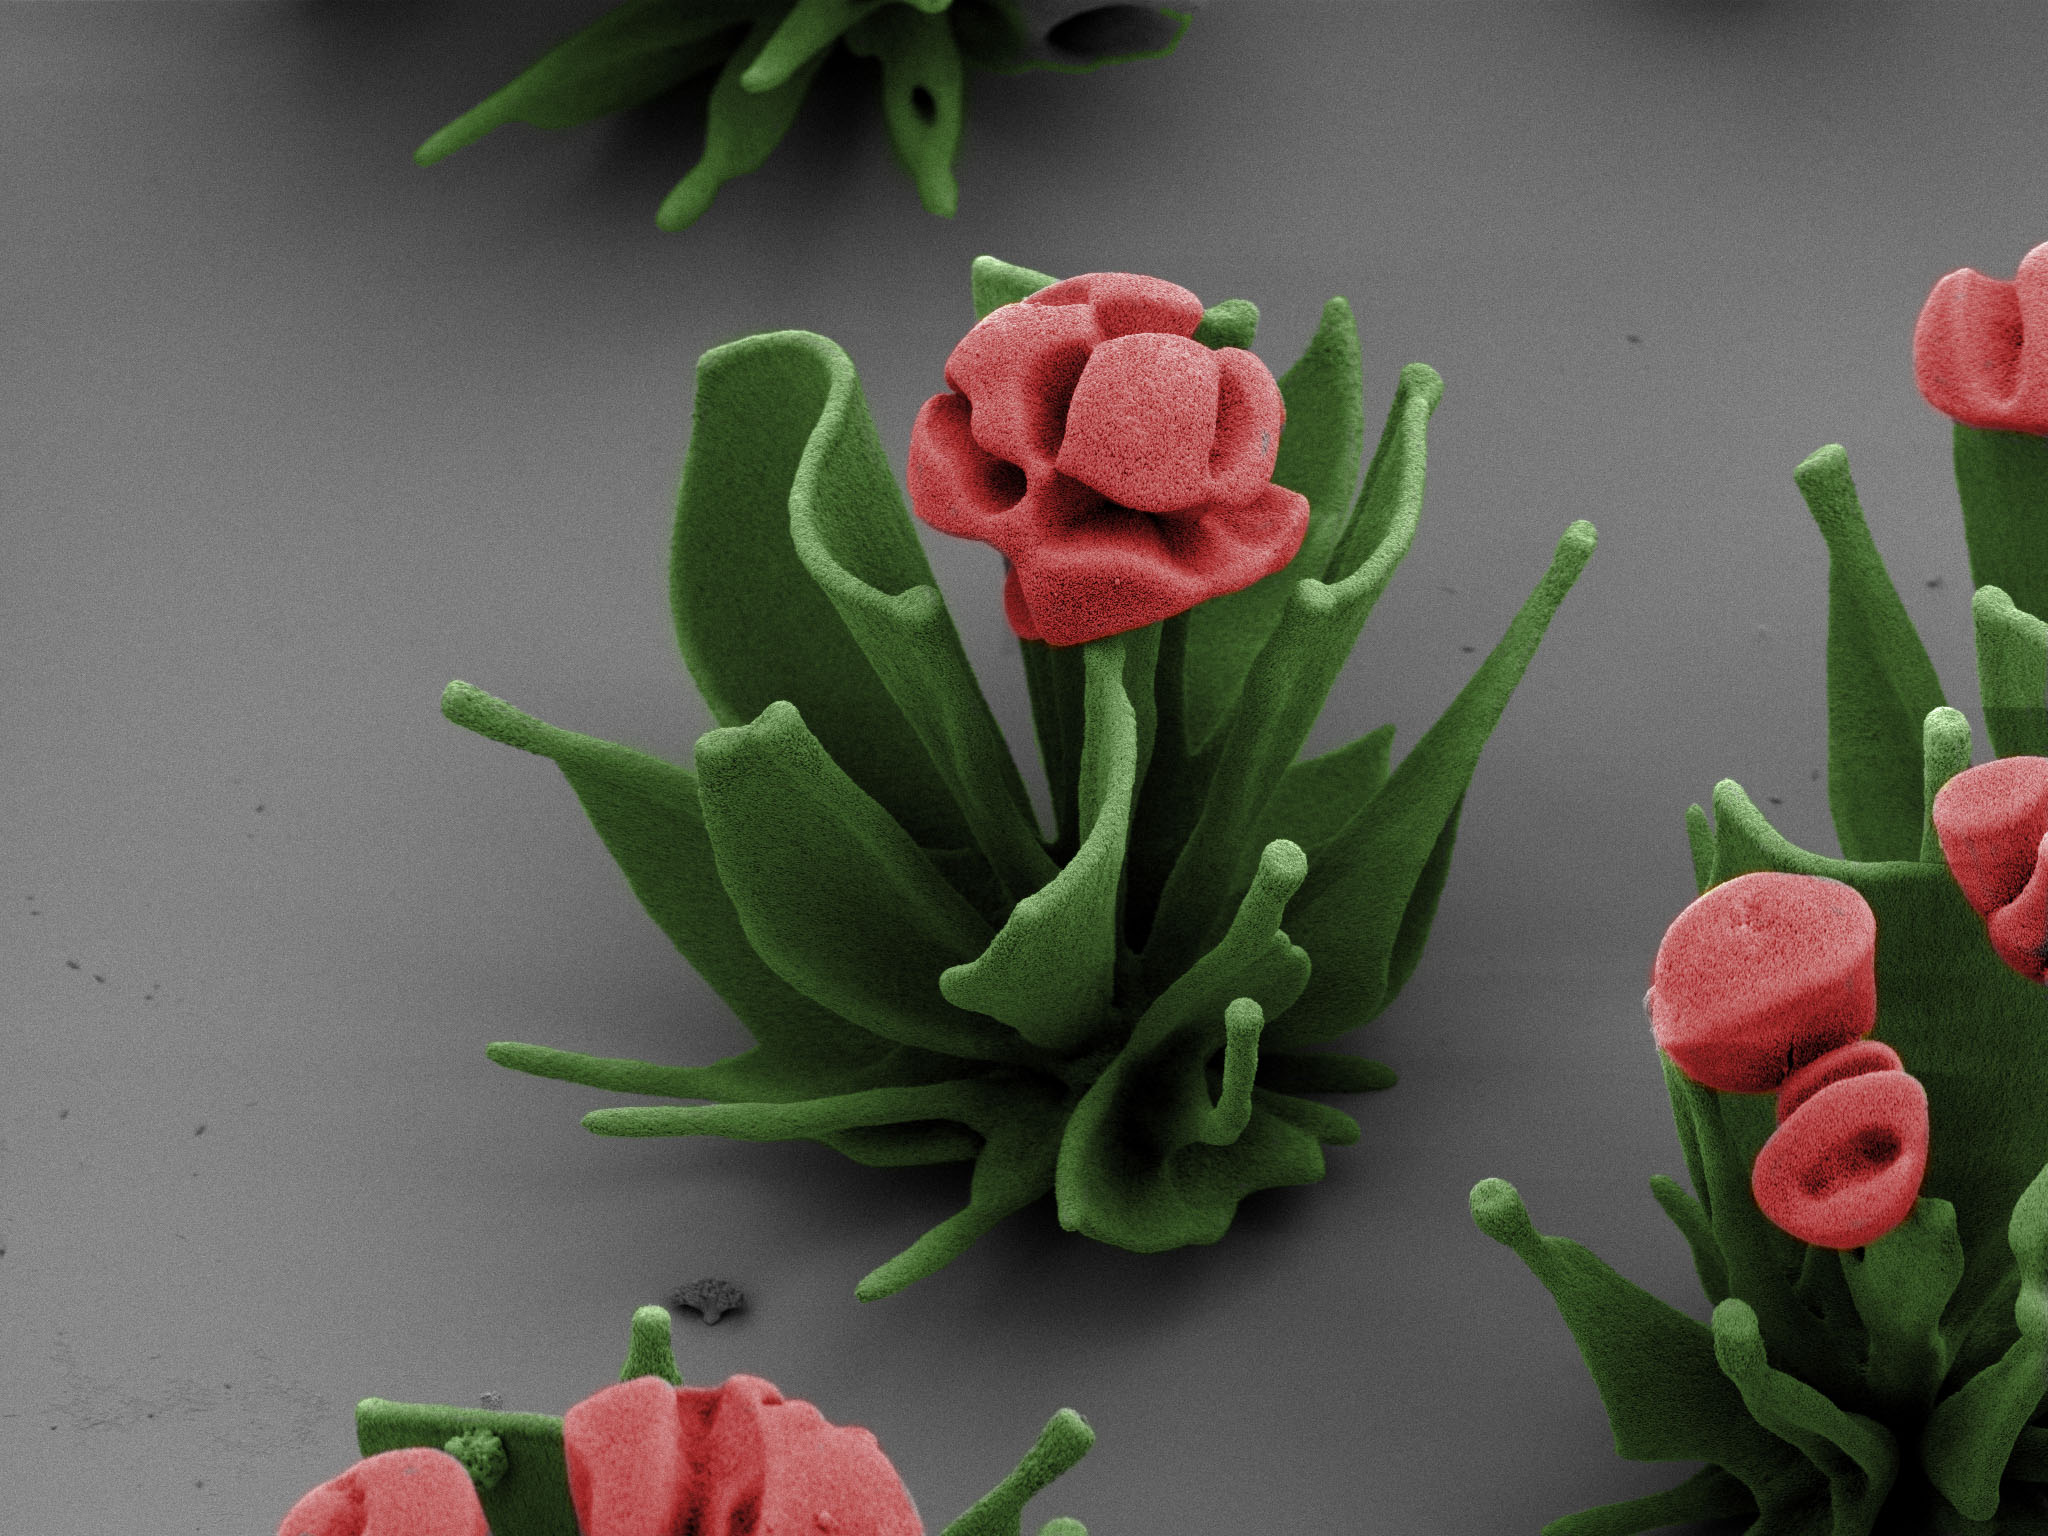 8 Tiny Sculptures You Can Only See With An Electron Microscope